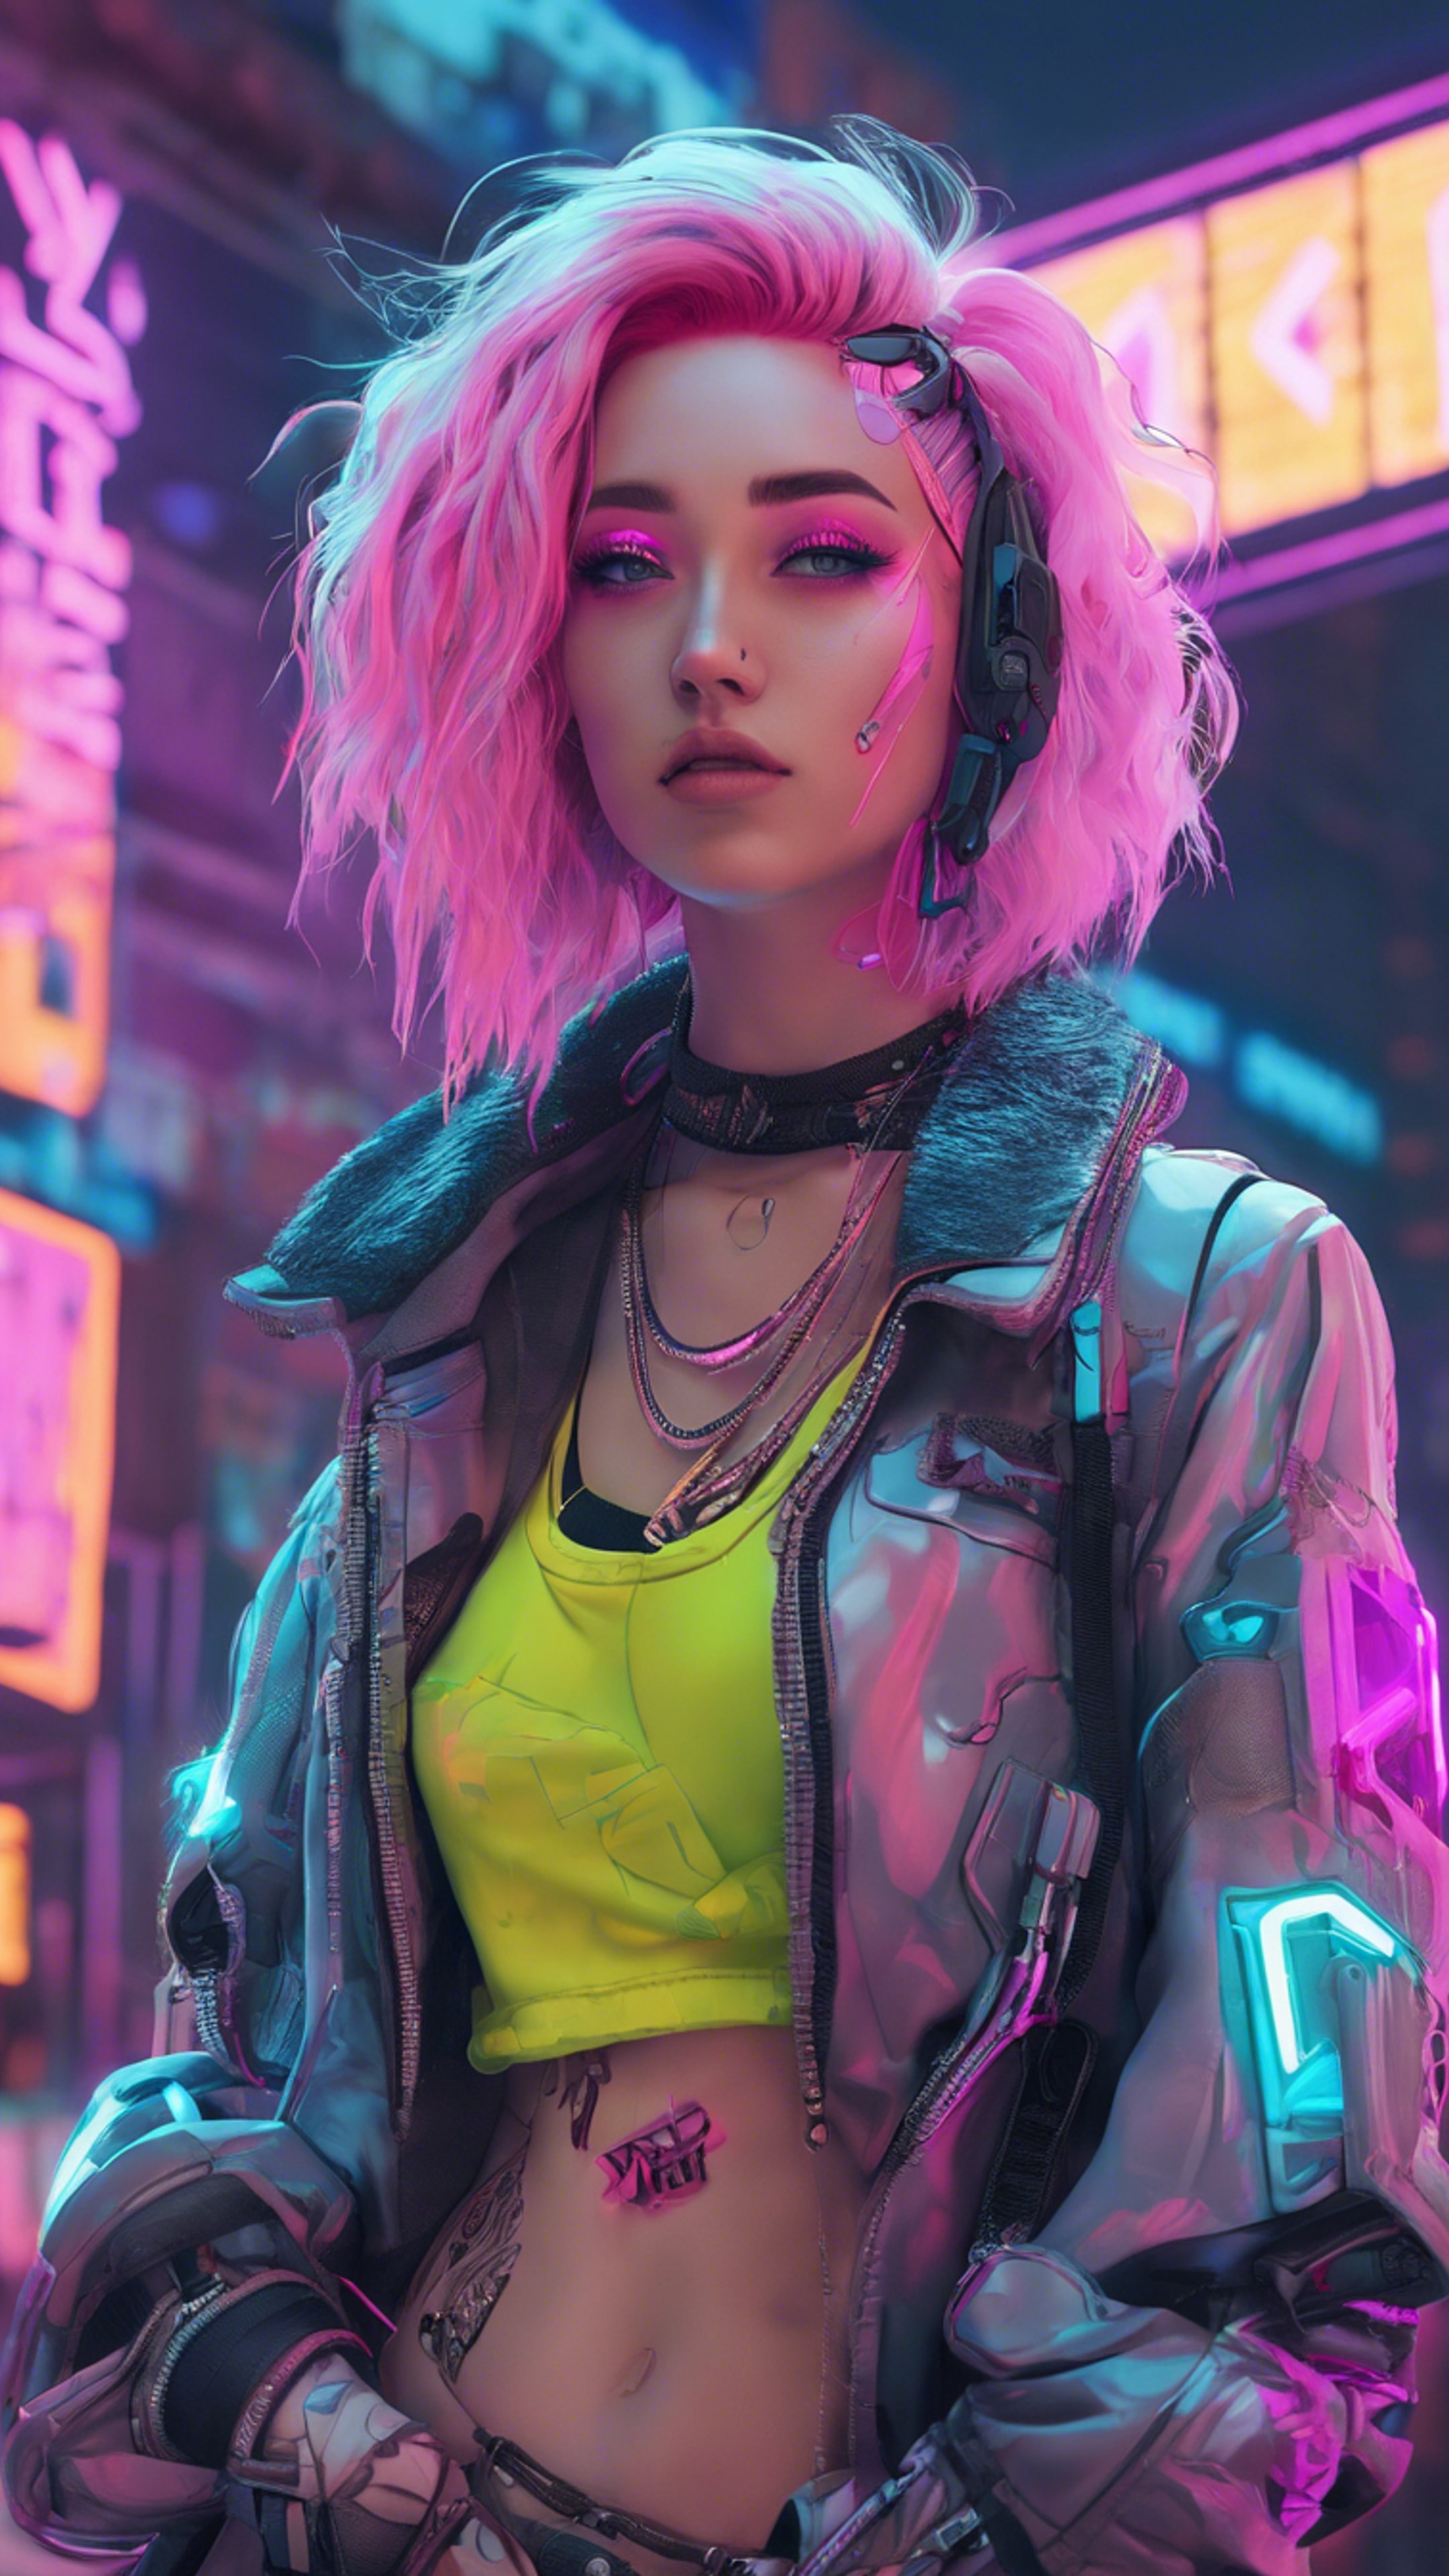 A pastel cyberpunk girl with brightly colored hair, standing in front of a neon sign. วอลล์เปเปอร์[dbbad63d7b584975aa4e]